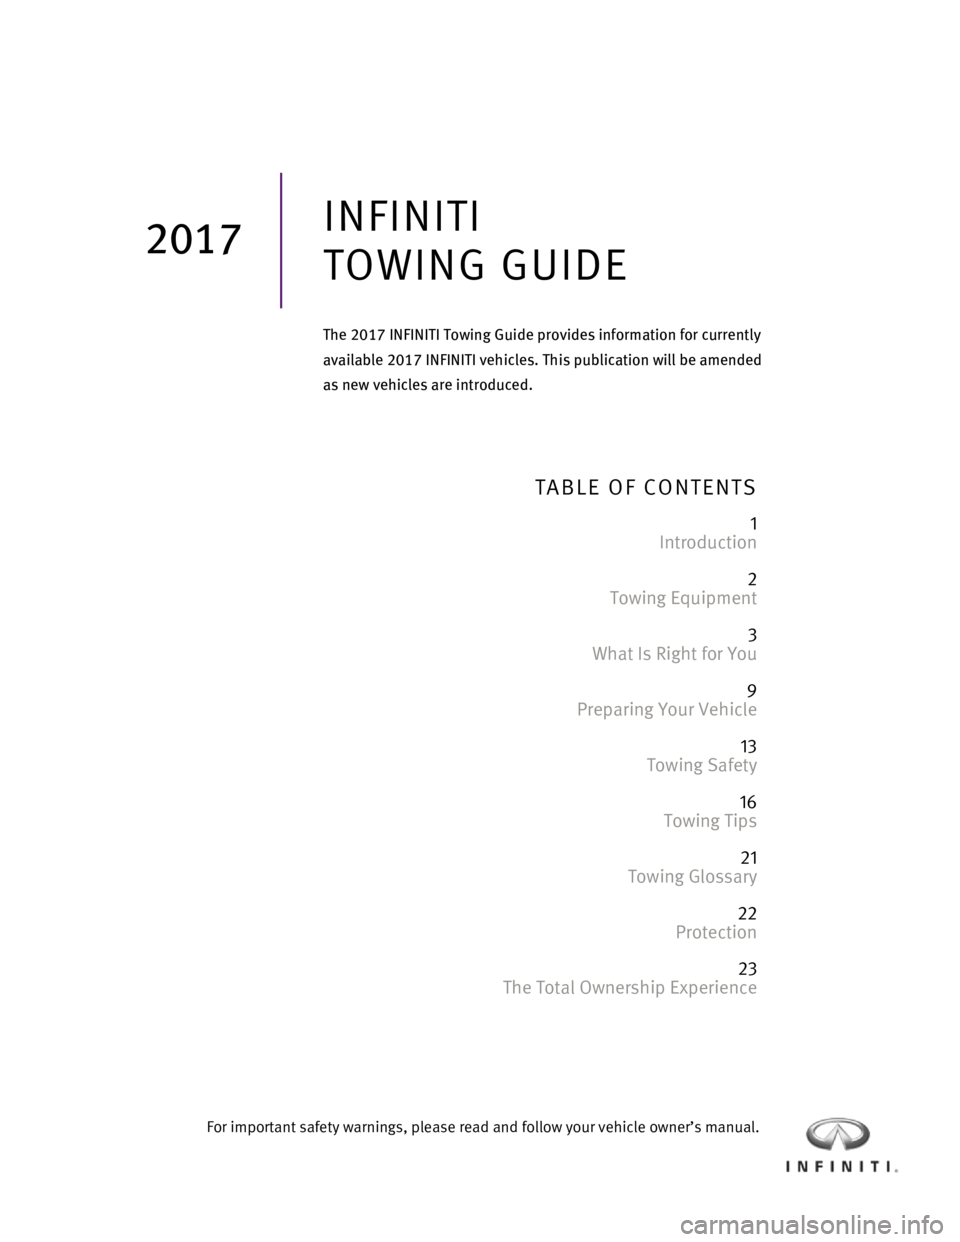 INFINITI Q50 2017  Towing Guide   
 
 
 
 
 
 
 
 
 
TABLE OF CONTENTS  
 
1 
Introduction 
 
2 
Towing Equipment 
 
3 
What Is Right for You 
 
9 
Preparing Your Vehicle 
 
13 
Towing Safety 
 
16 
Towing Tips 
 
21 
Towing Glossar